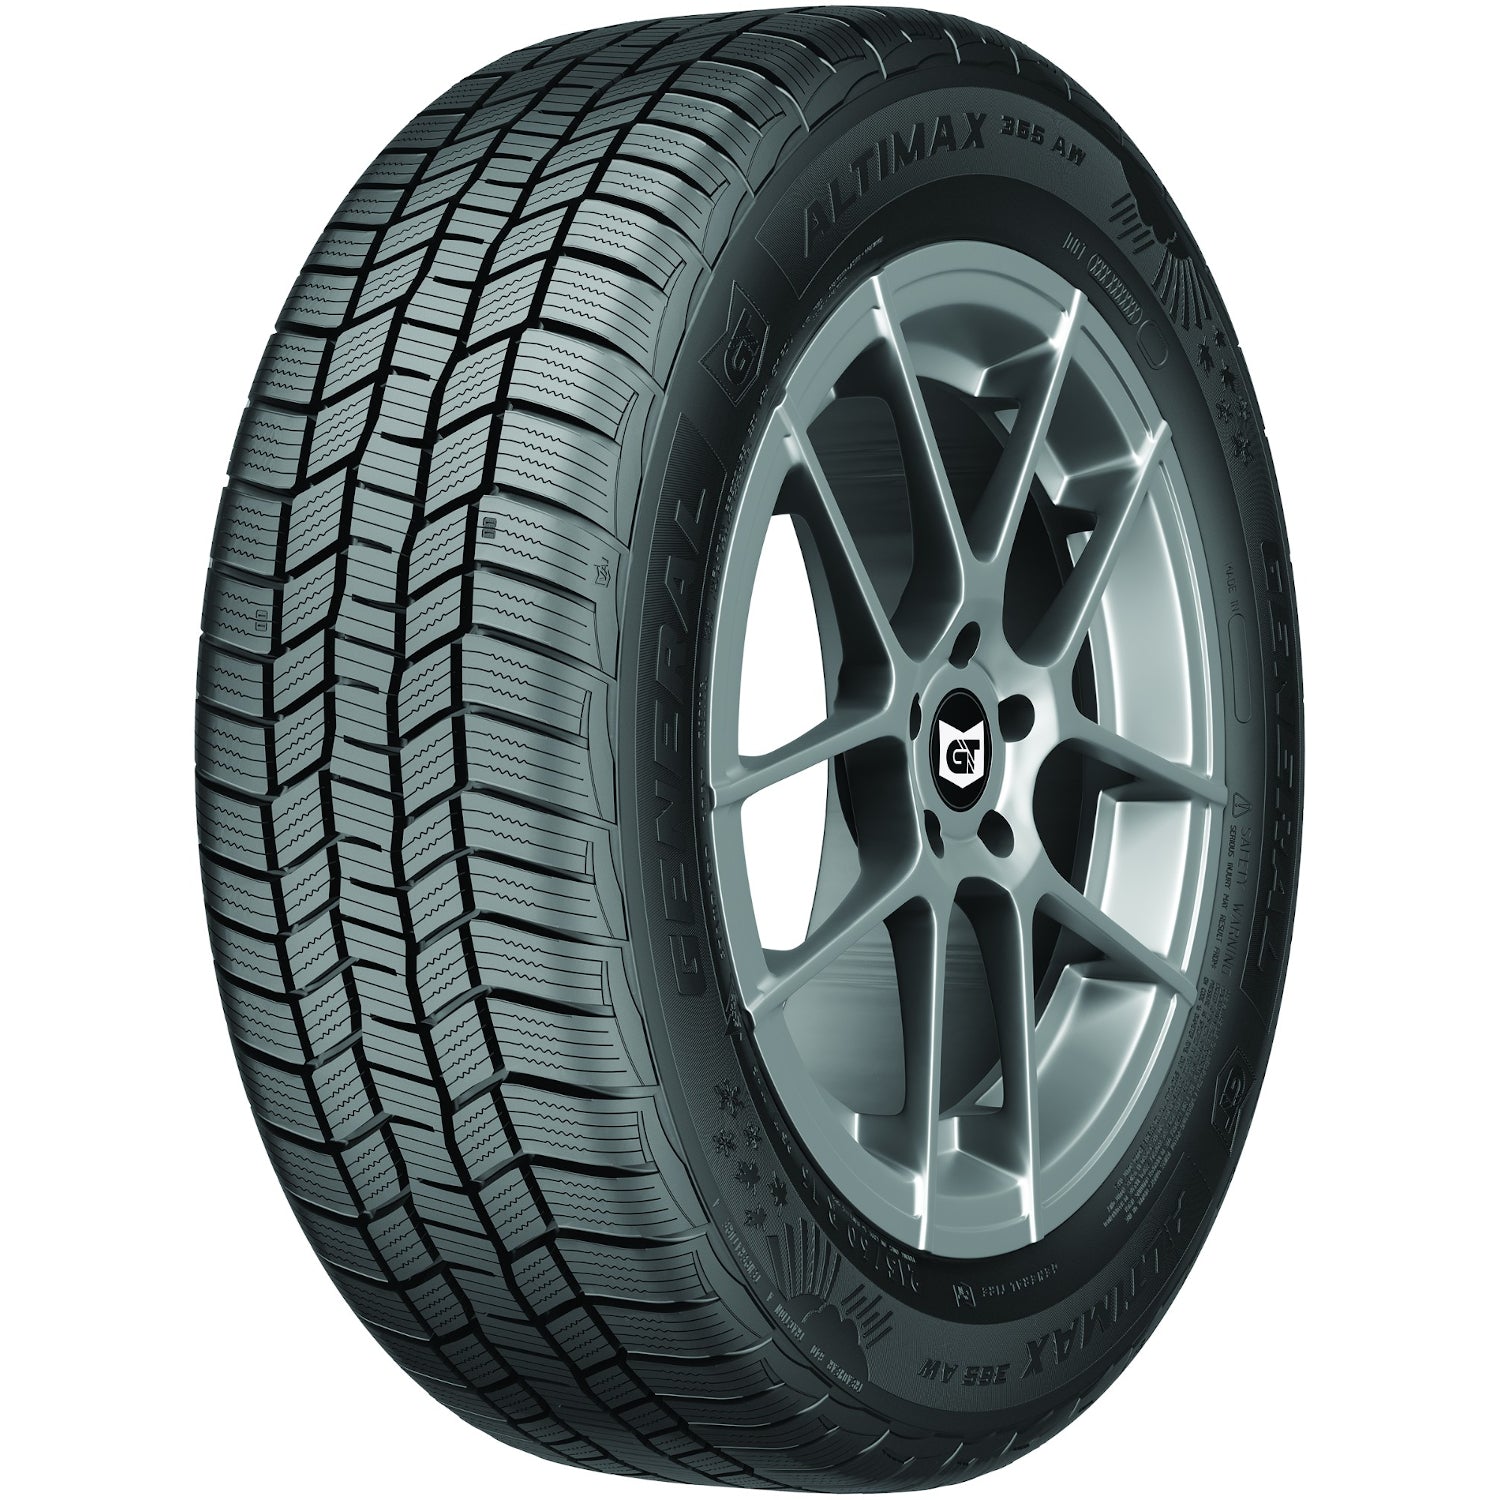 GENERAL ALTIMAX 365AW 185/60R15 (23.7X7.3R 15) Tires